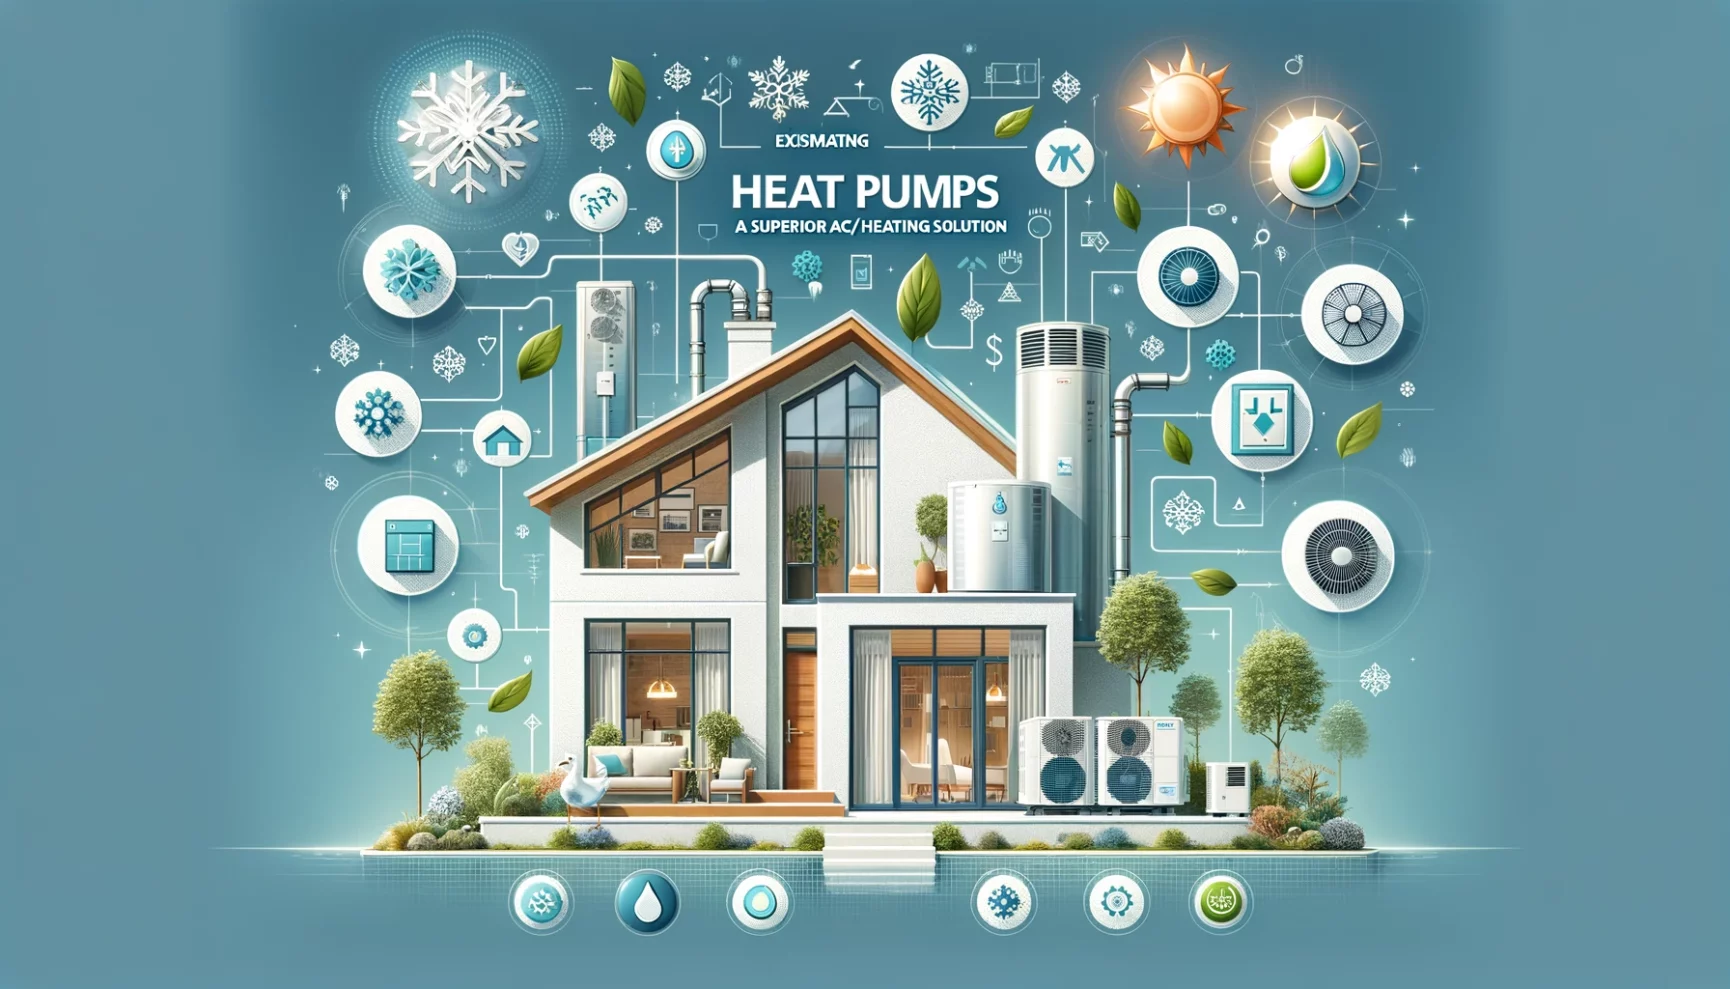 An illustration of a house with heat pumps for heating.